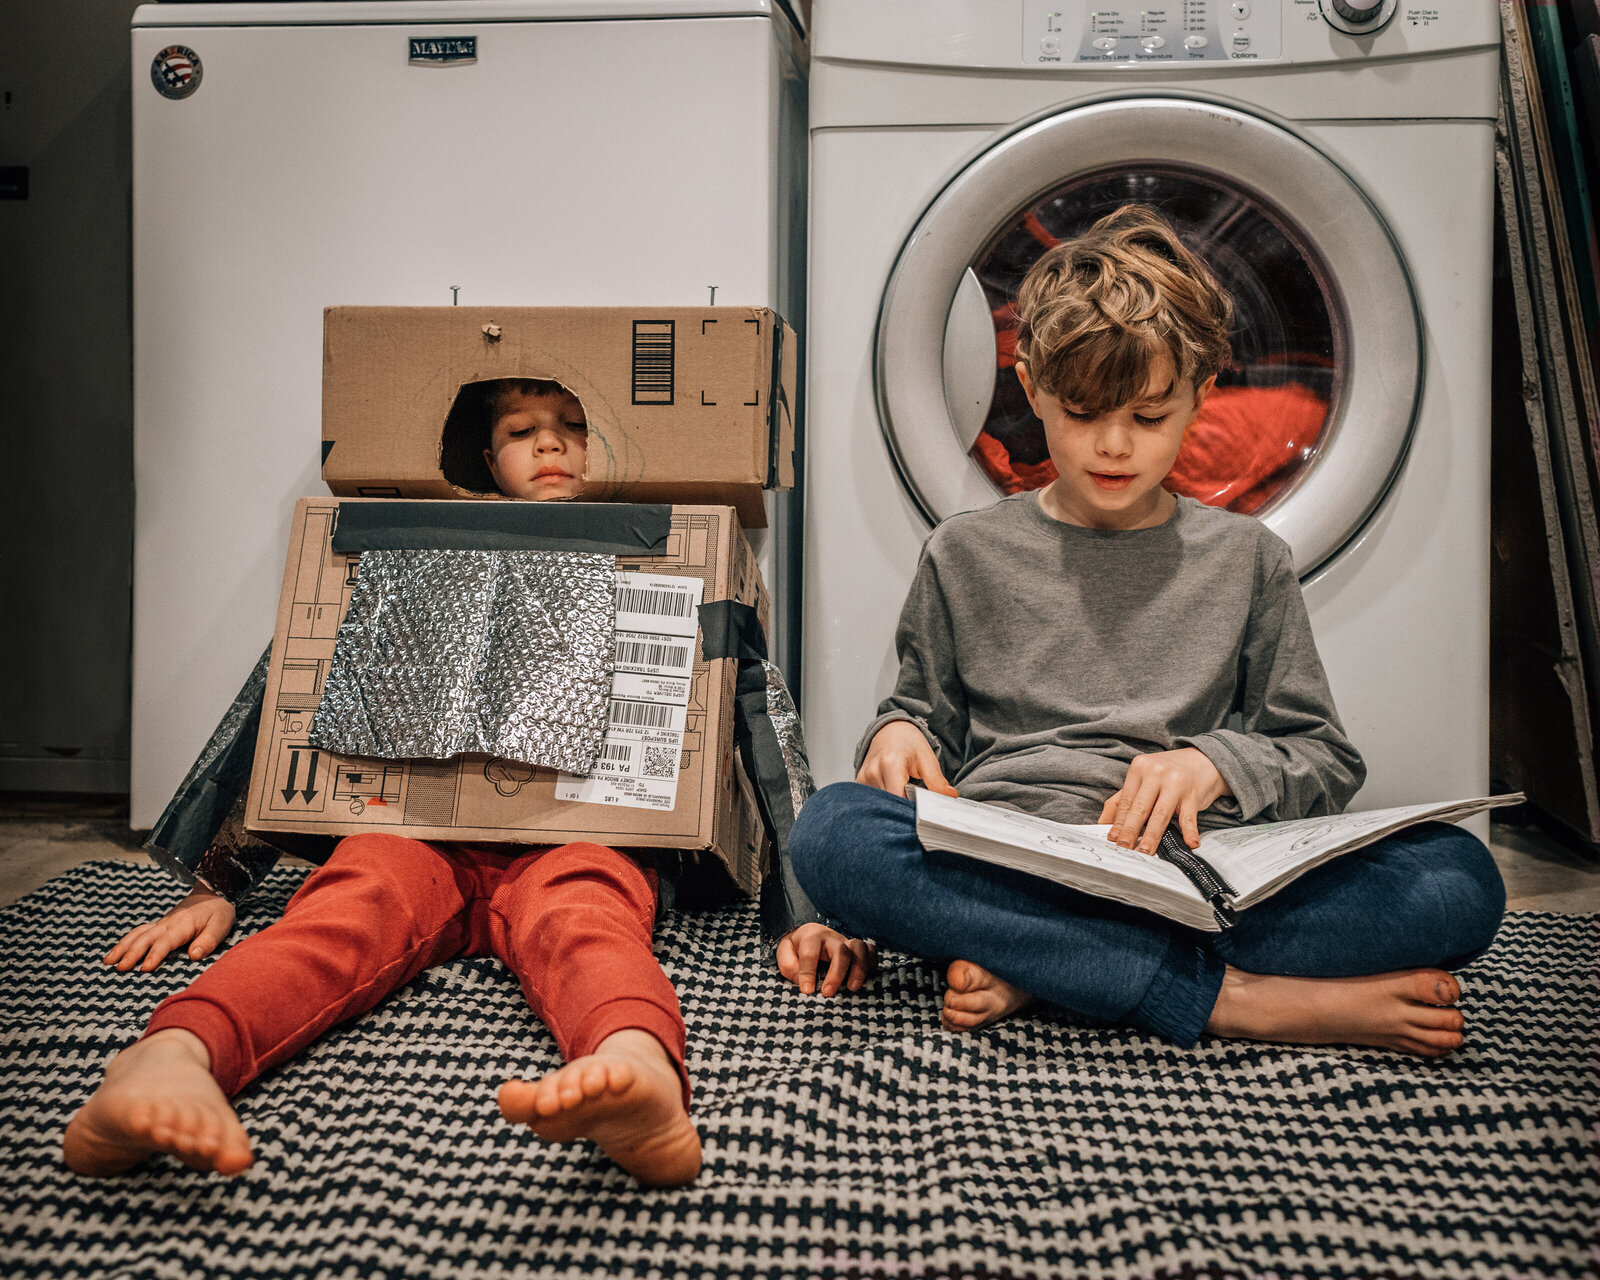 Two boys sitting in front of washer and dryer